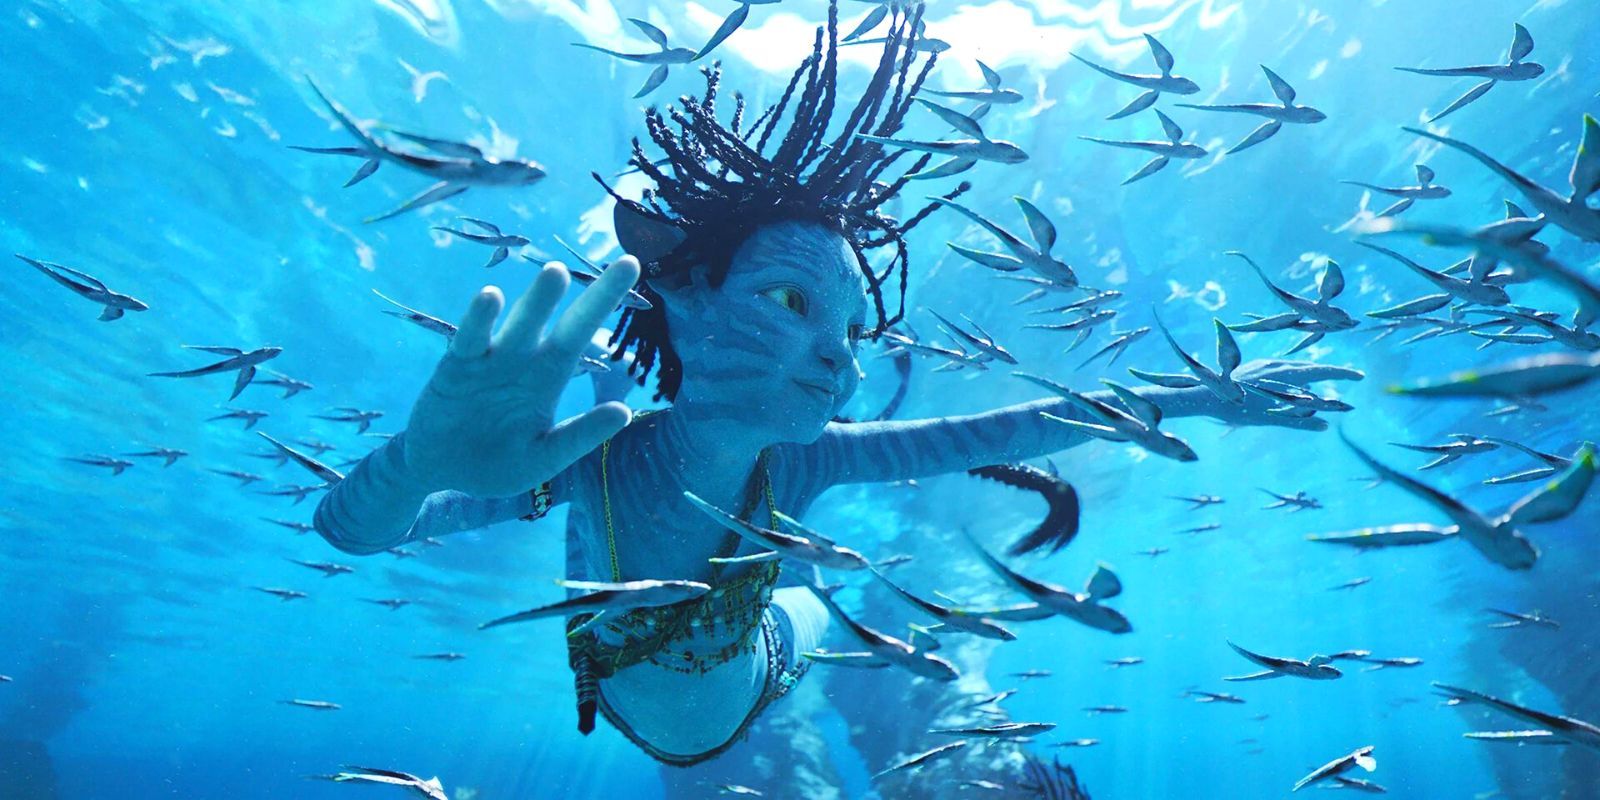 A young Na'vi child swimming in the ocean in a shoal of fish